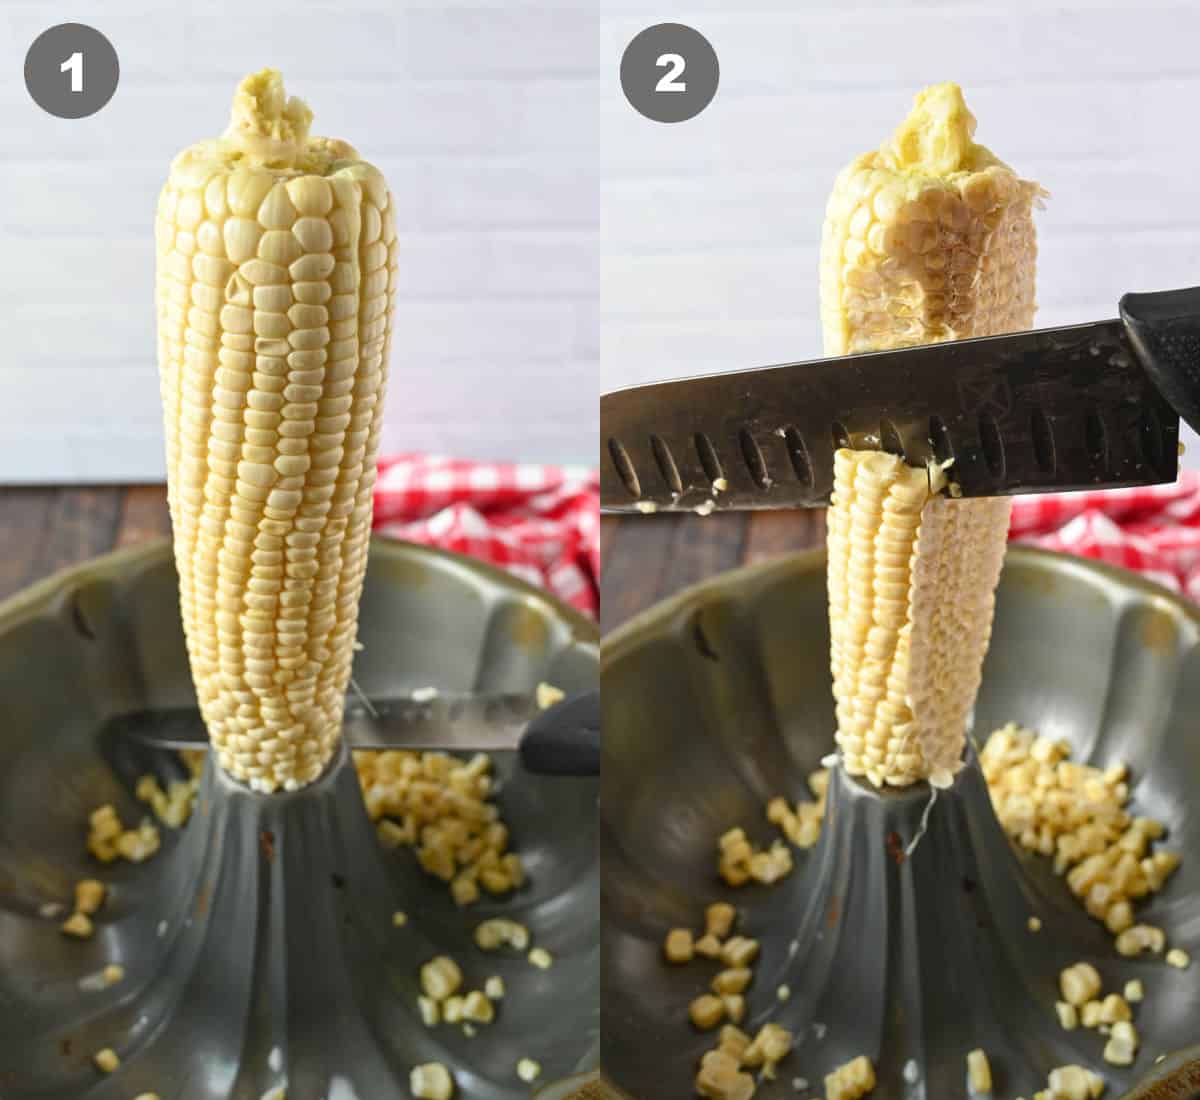 Corn cob placed in a bundt pan and a knife cutting the kernals off.